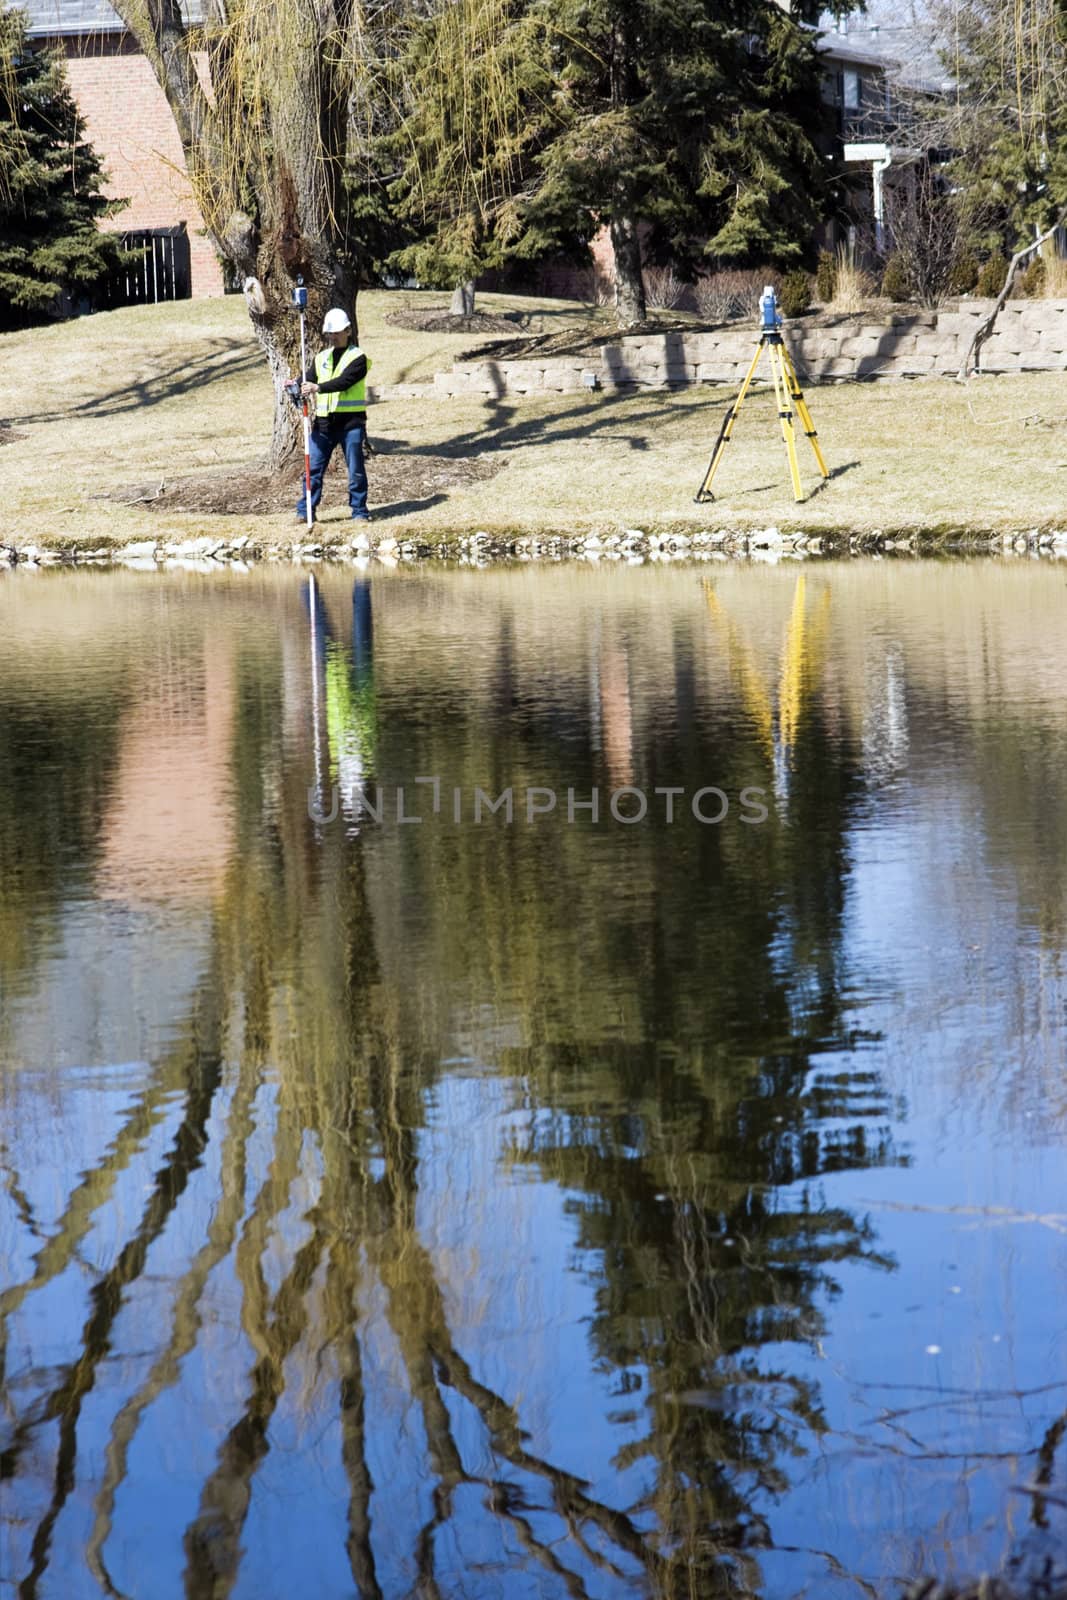 Taking measurements by the lake by benkrut